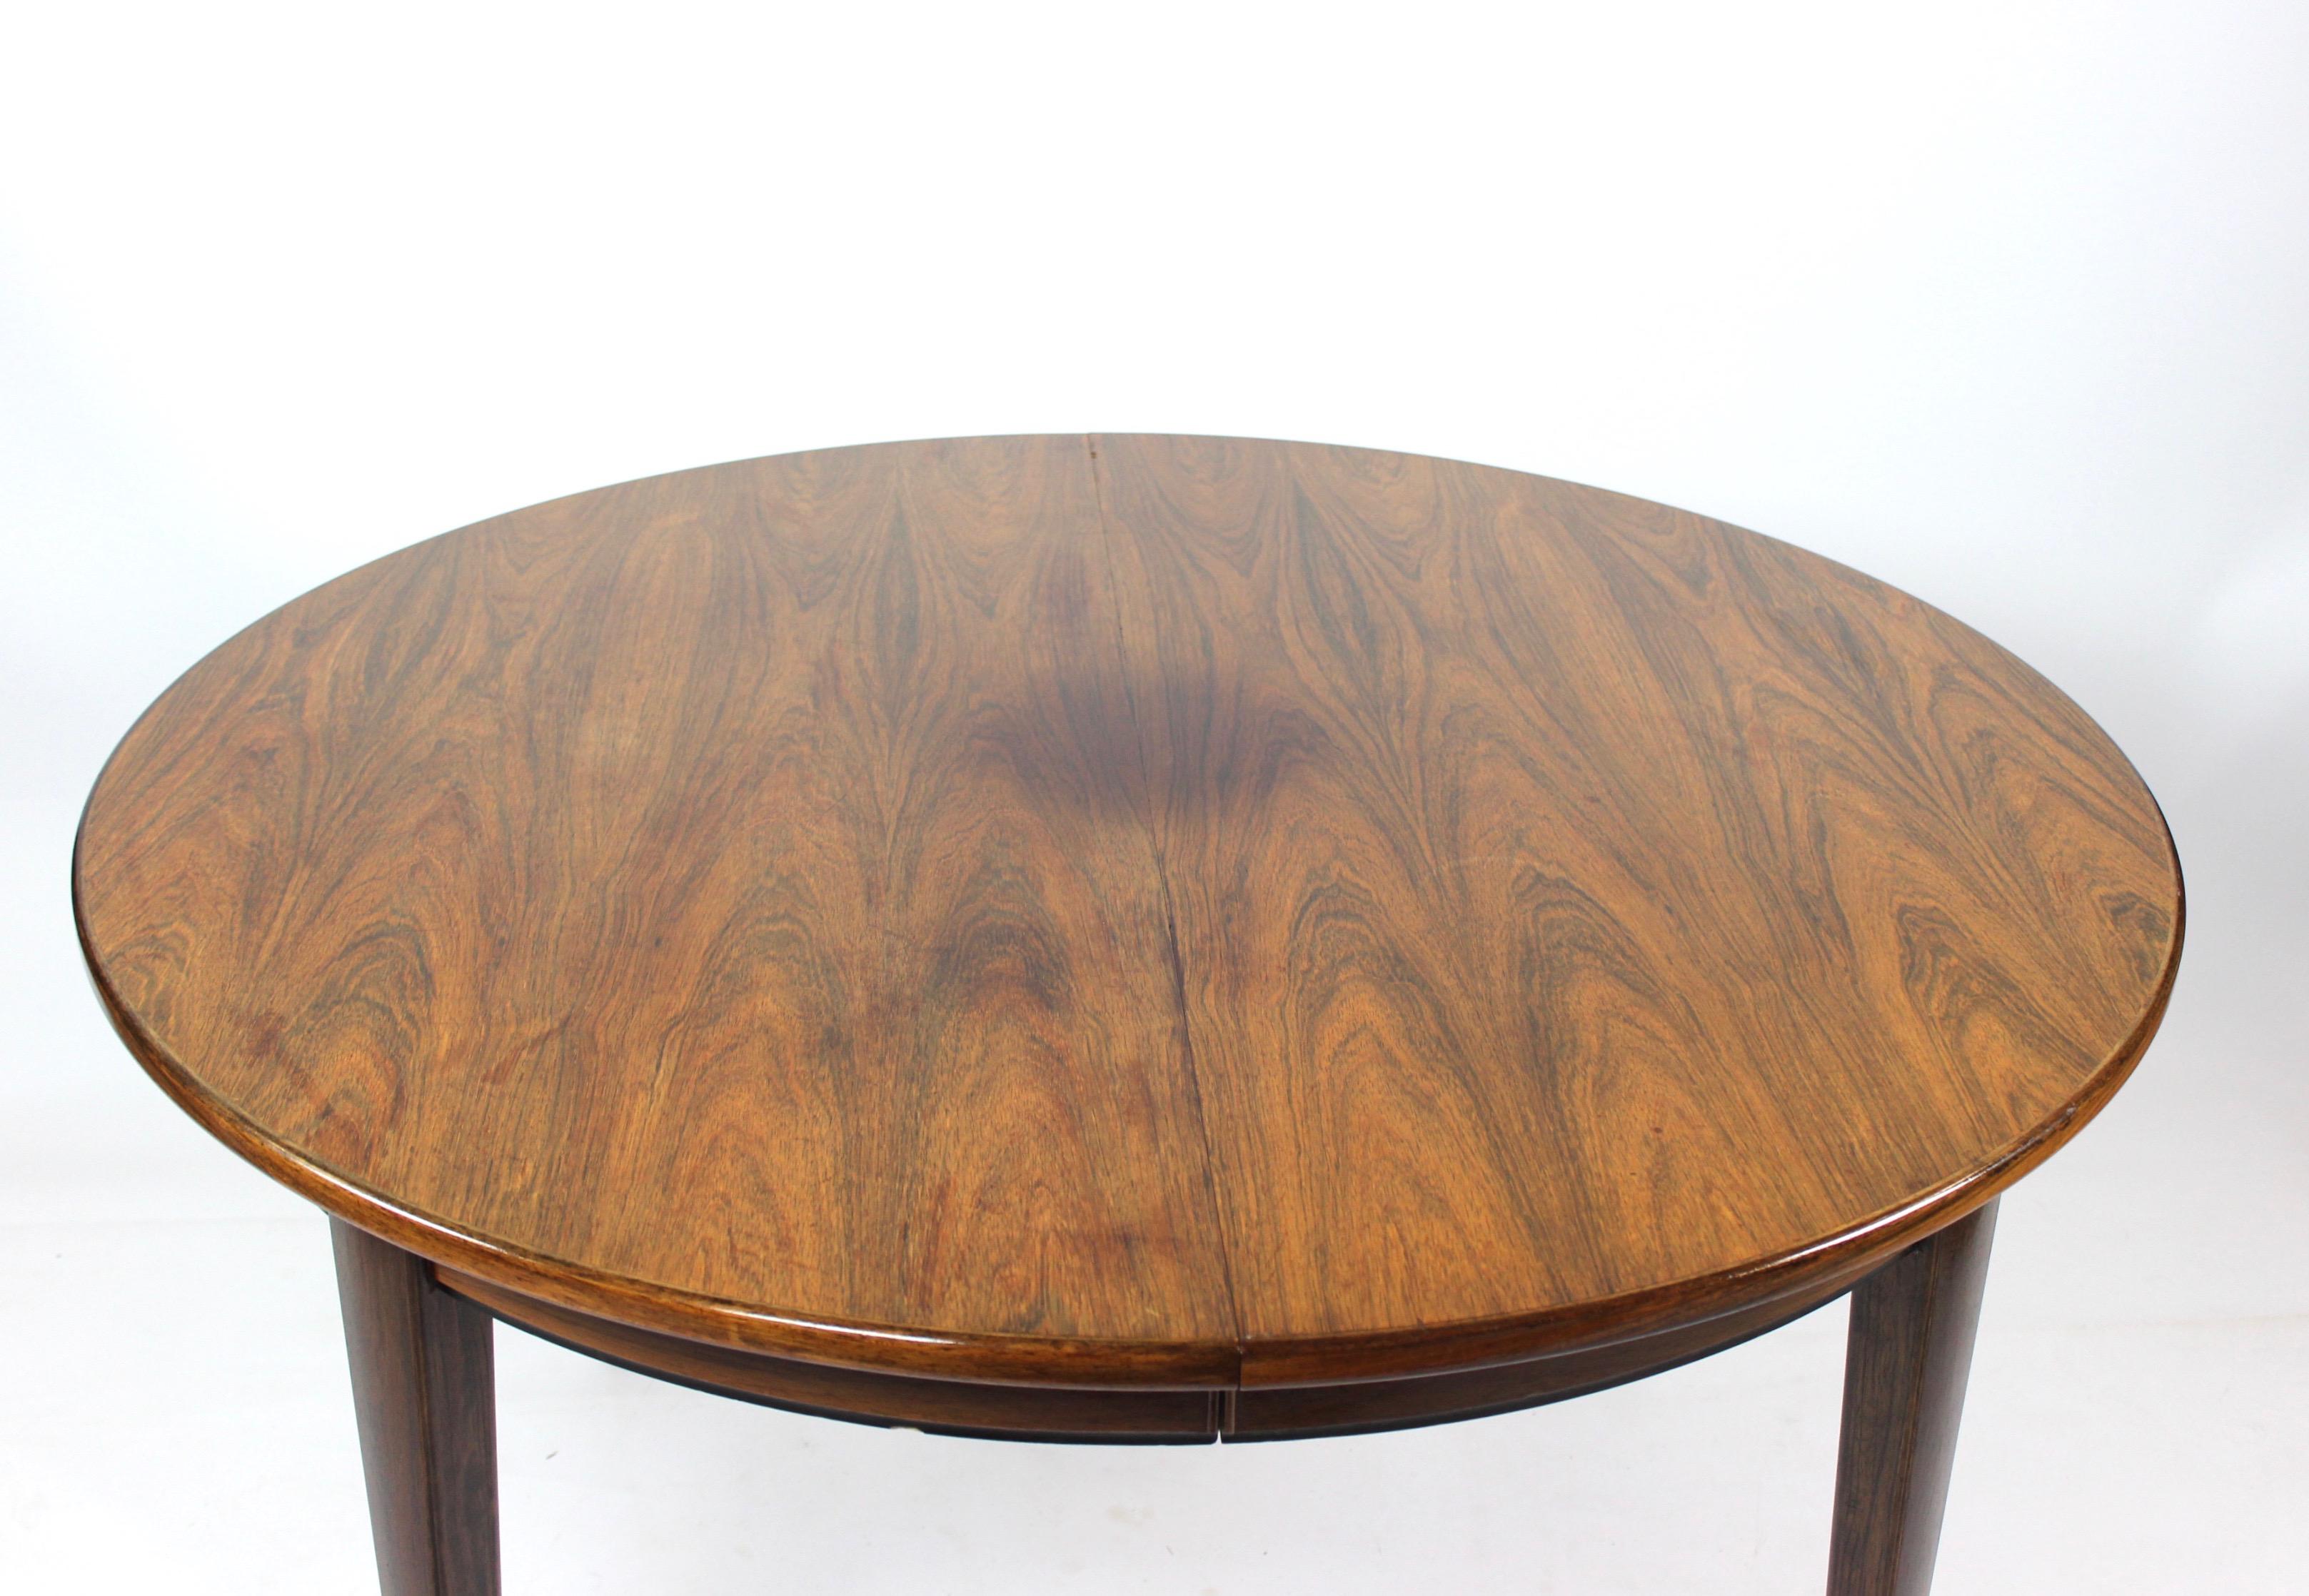 Elegance of mid-century design with this remarkable dining table crafted by Omann Junior in the 1960s. Constructed from luxurious rosewood, this table exudes timeless sophistication while offering exceptional functionality.

A hallmark of